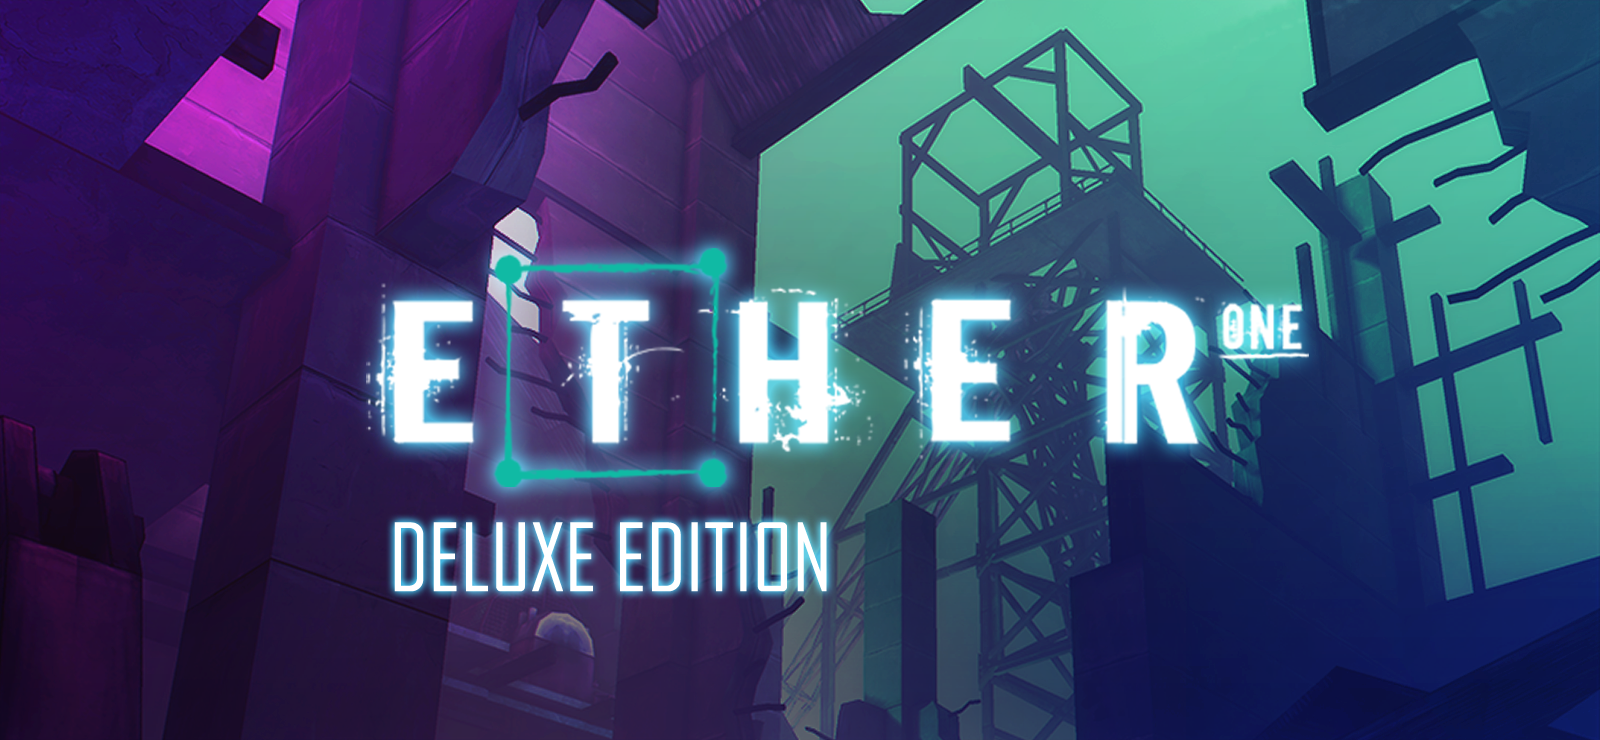 Ether One Redux Deluxe Edition